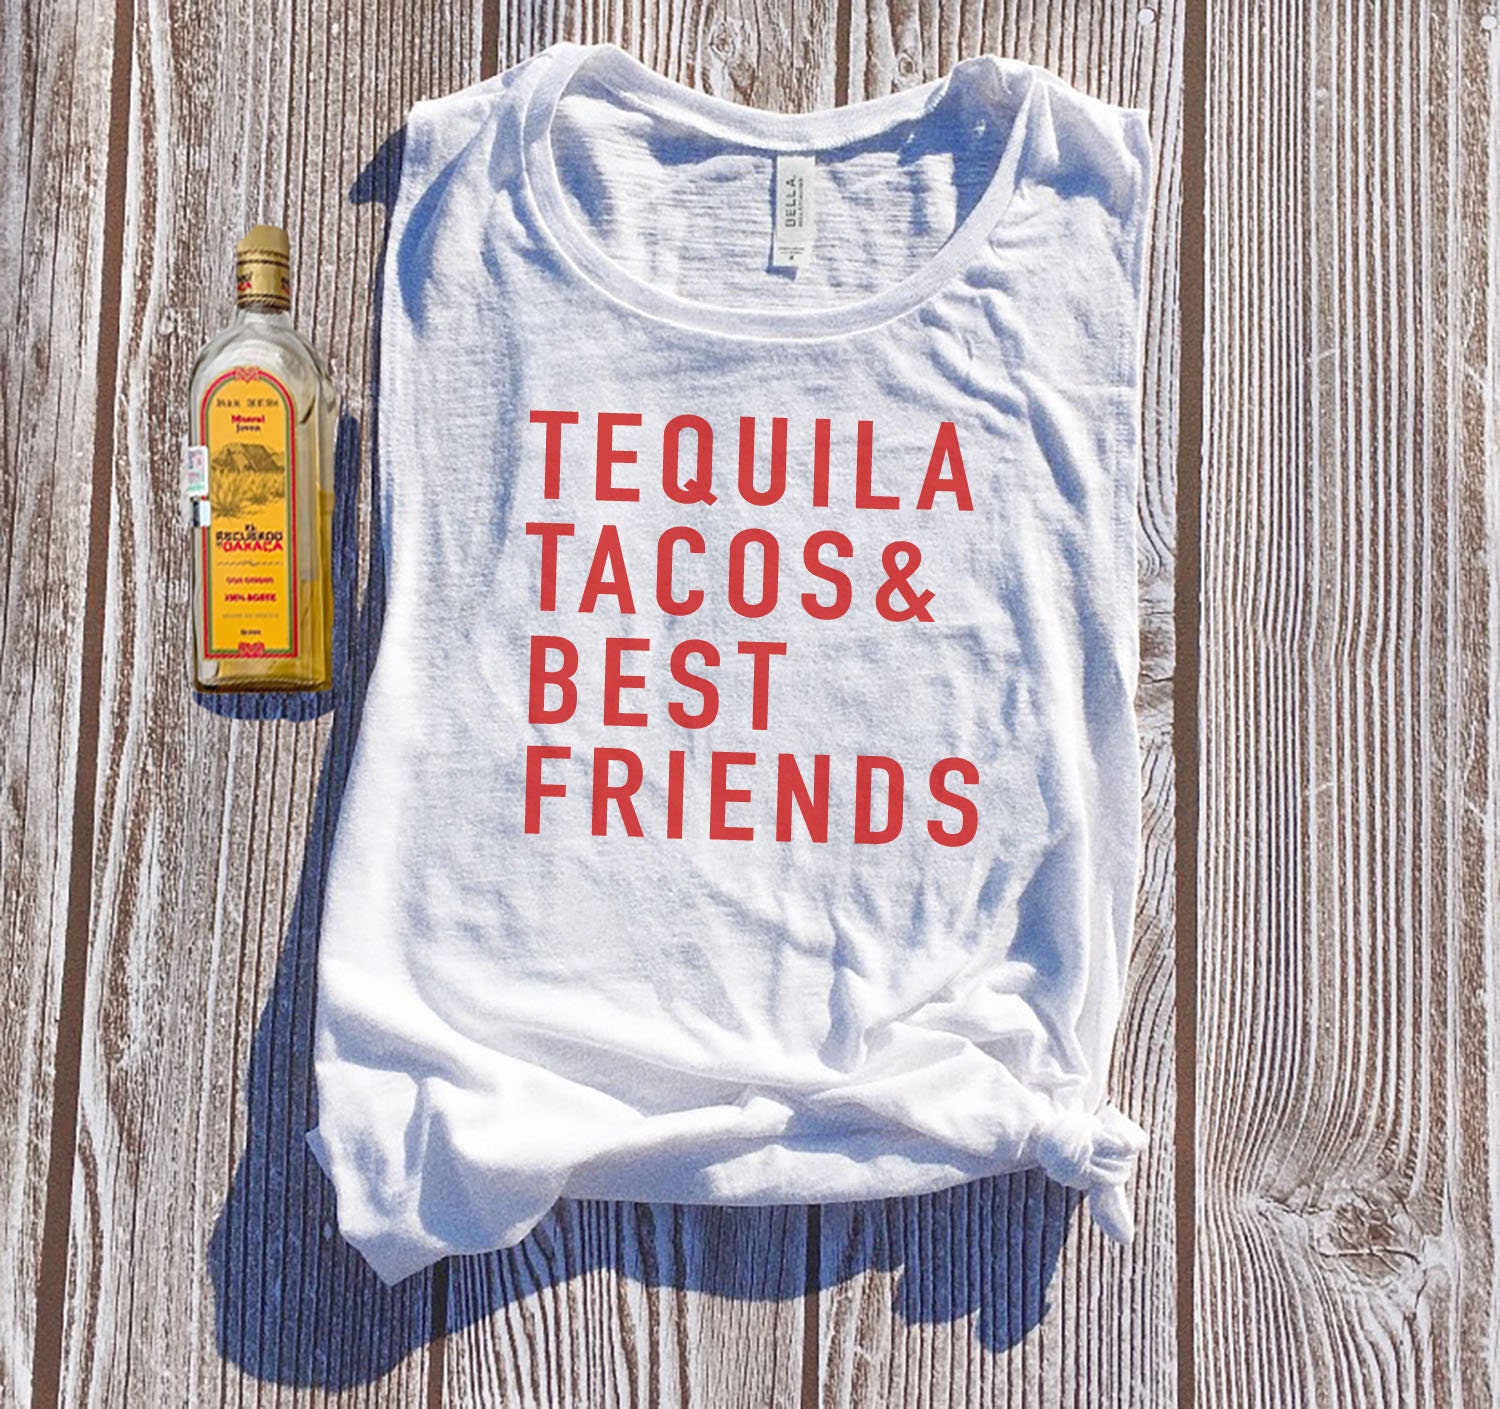 Tacos Tequila and Best Friends - Tea Towel - Lone Star Art